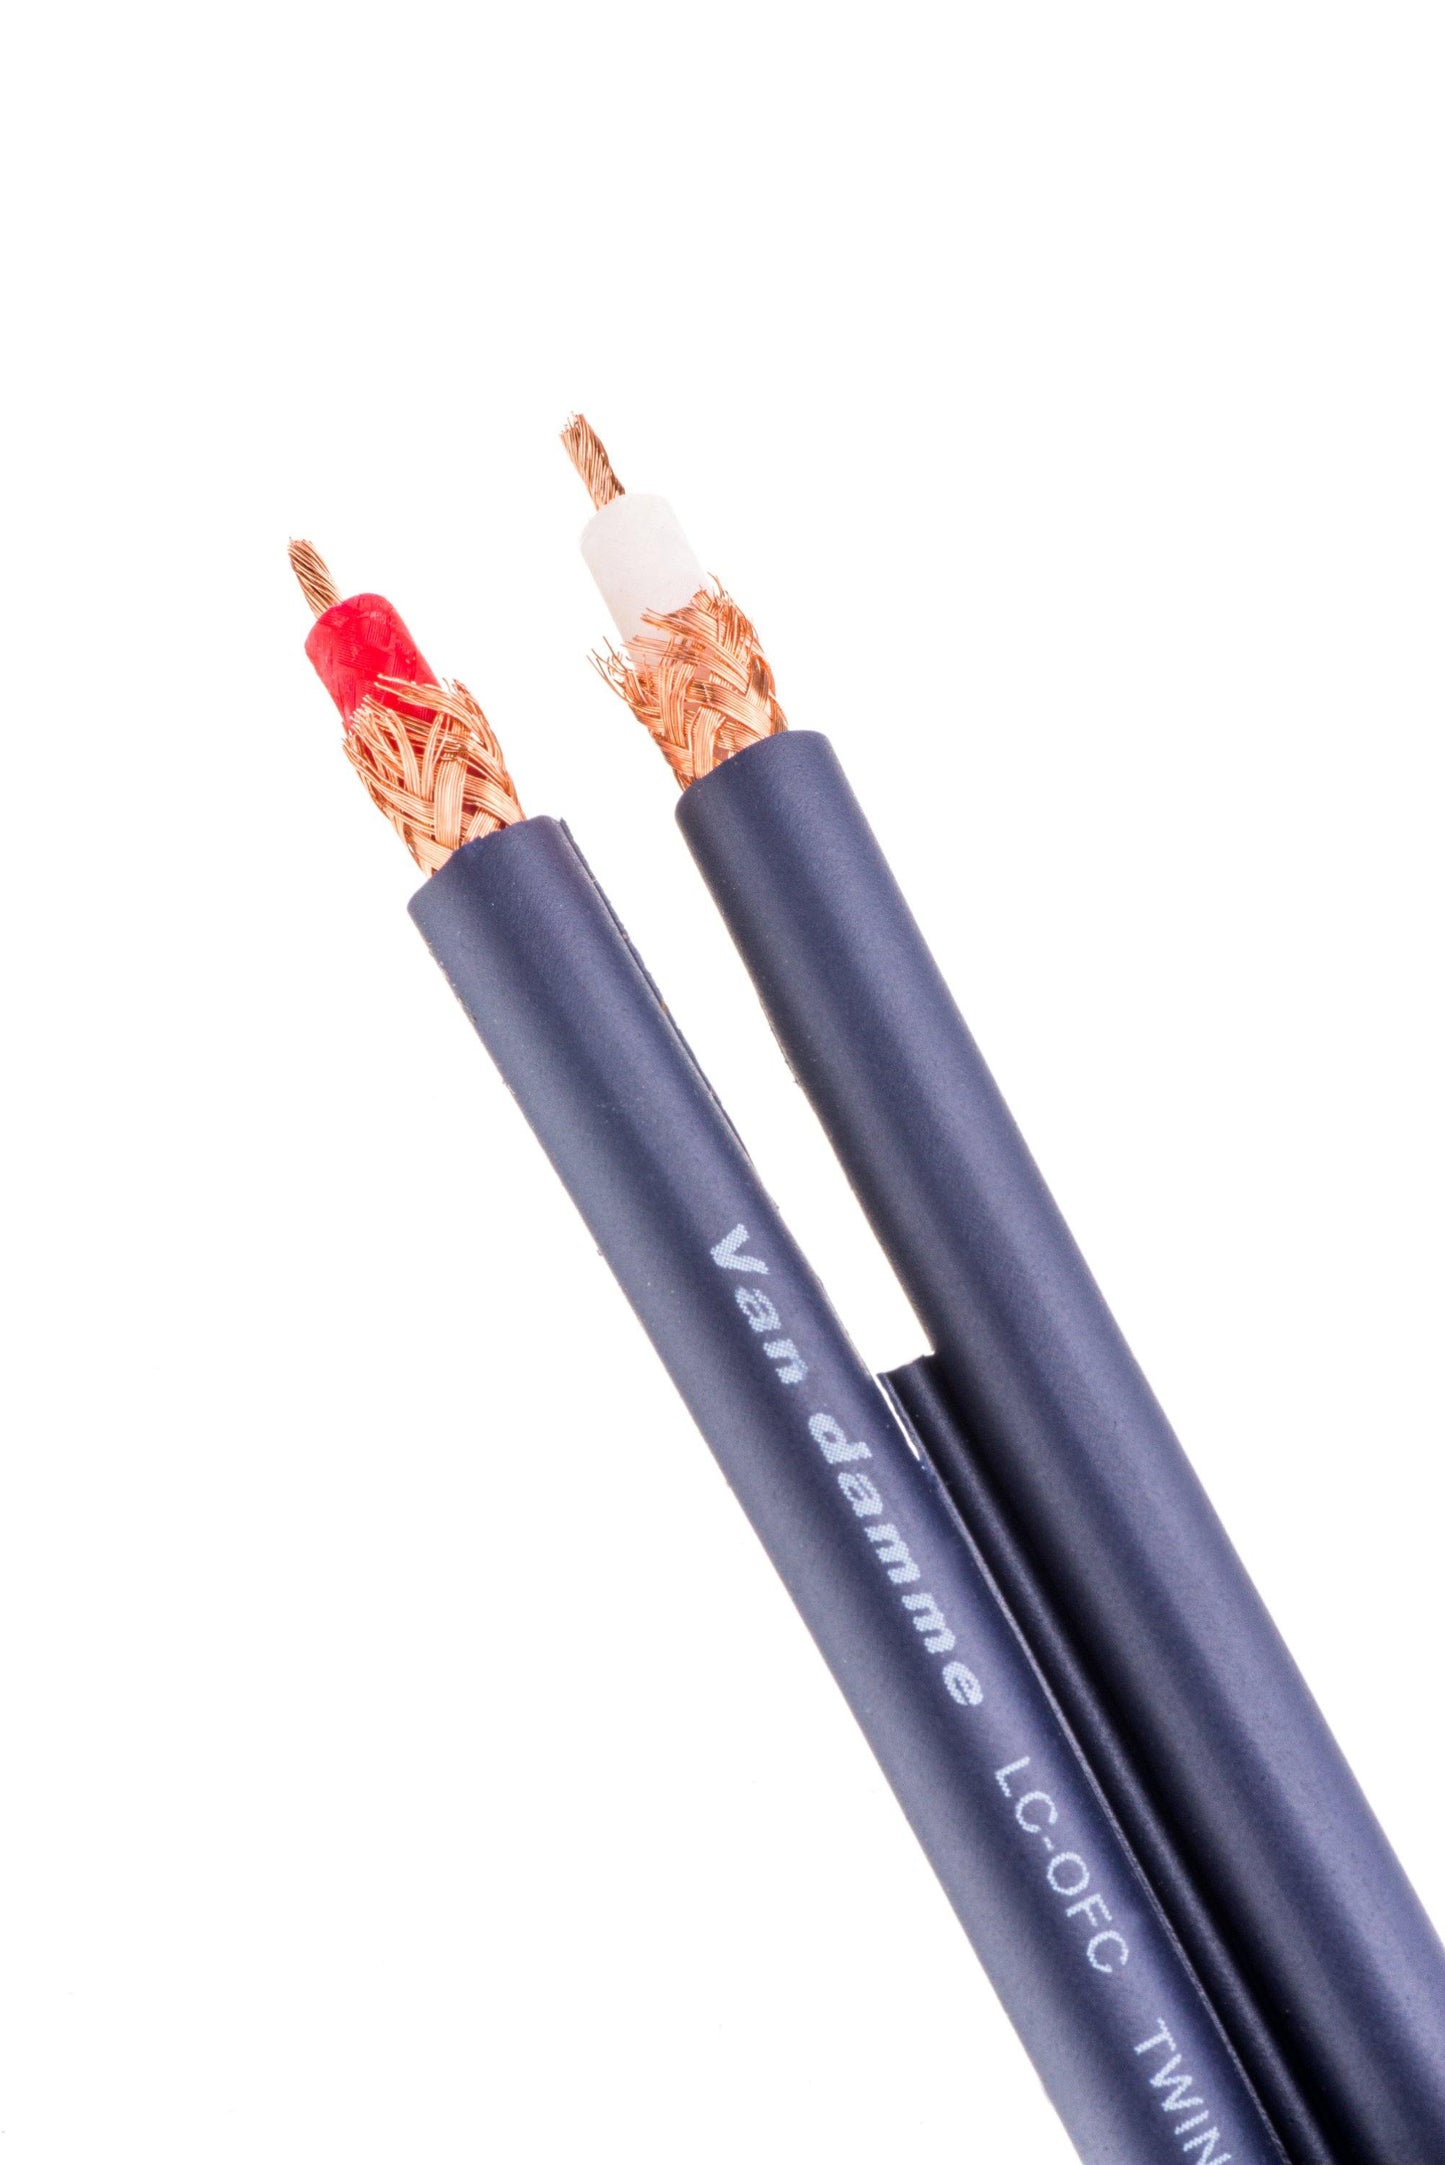 Van Damme UP-LCOFC Hi-Fi Twin Interconnect Cable - Arda Suppliers